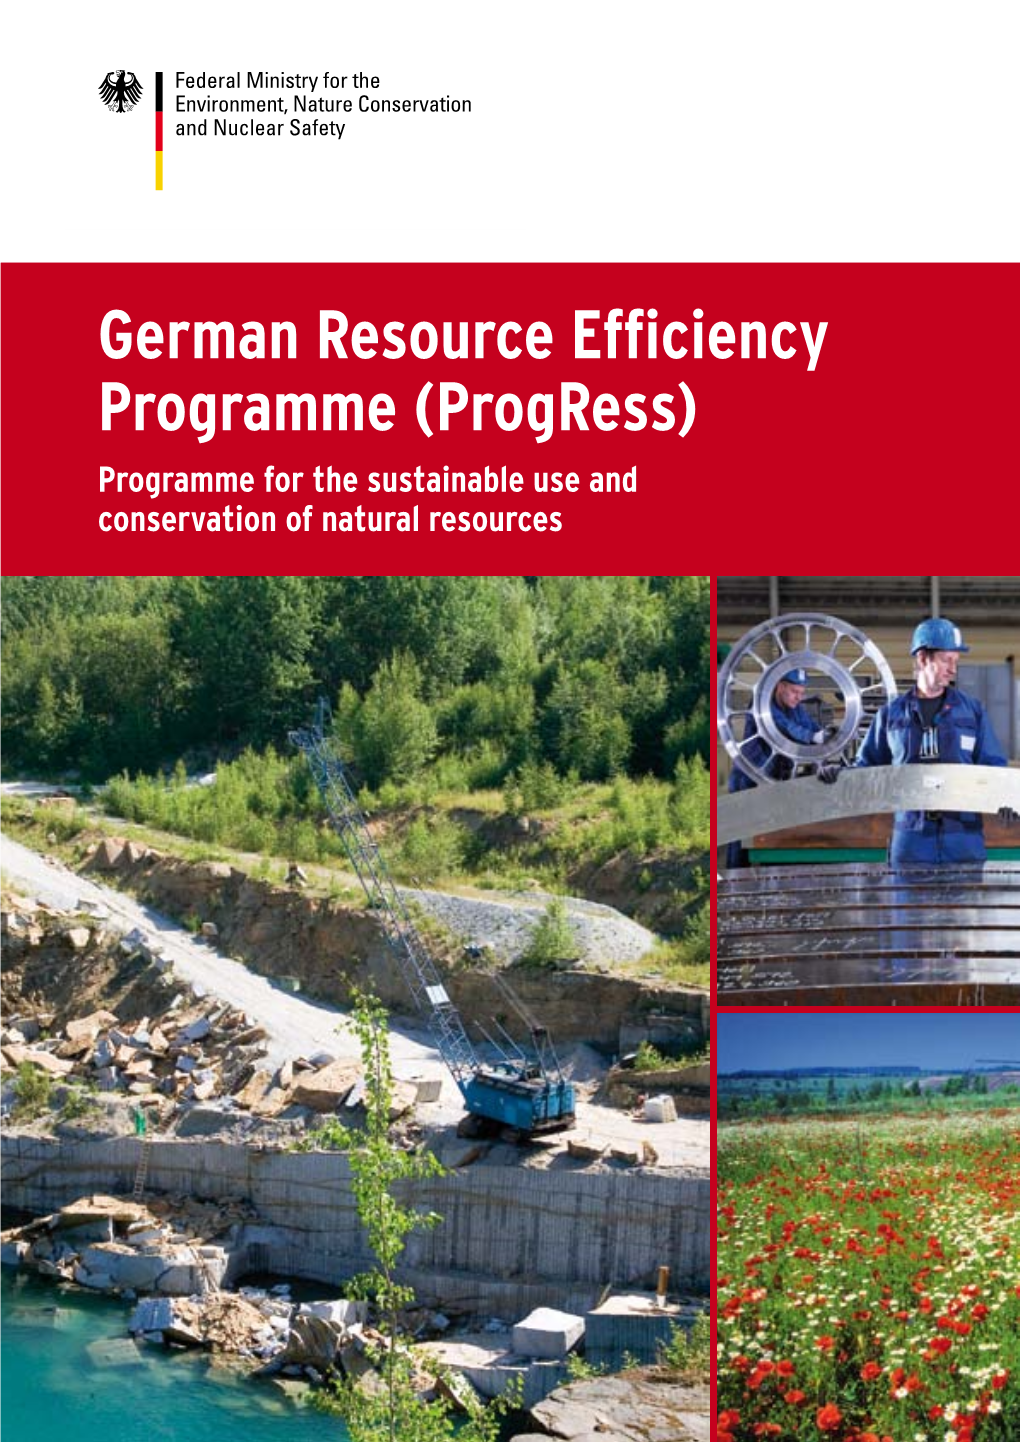 Federal Ministry for the Environment, Nature Conservation and Nuclear Safety: German Resource Efficiency Programme (Progress)